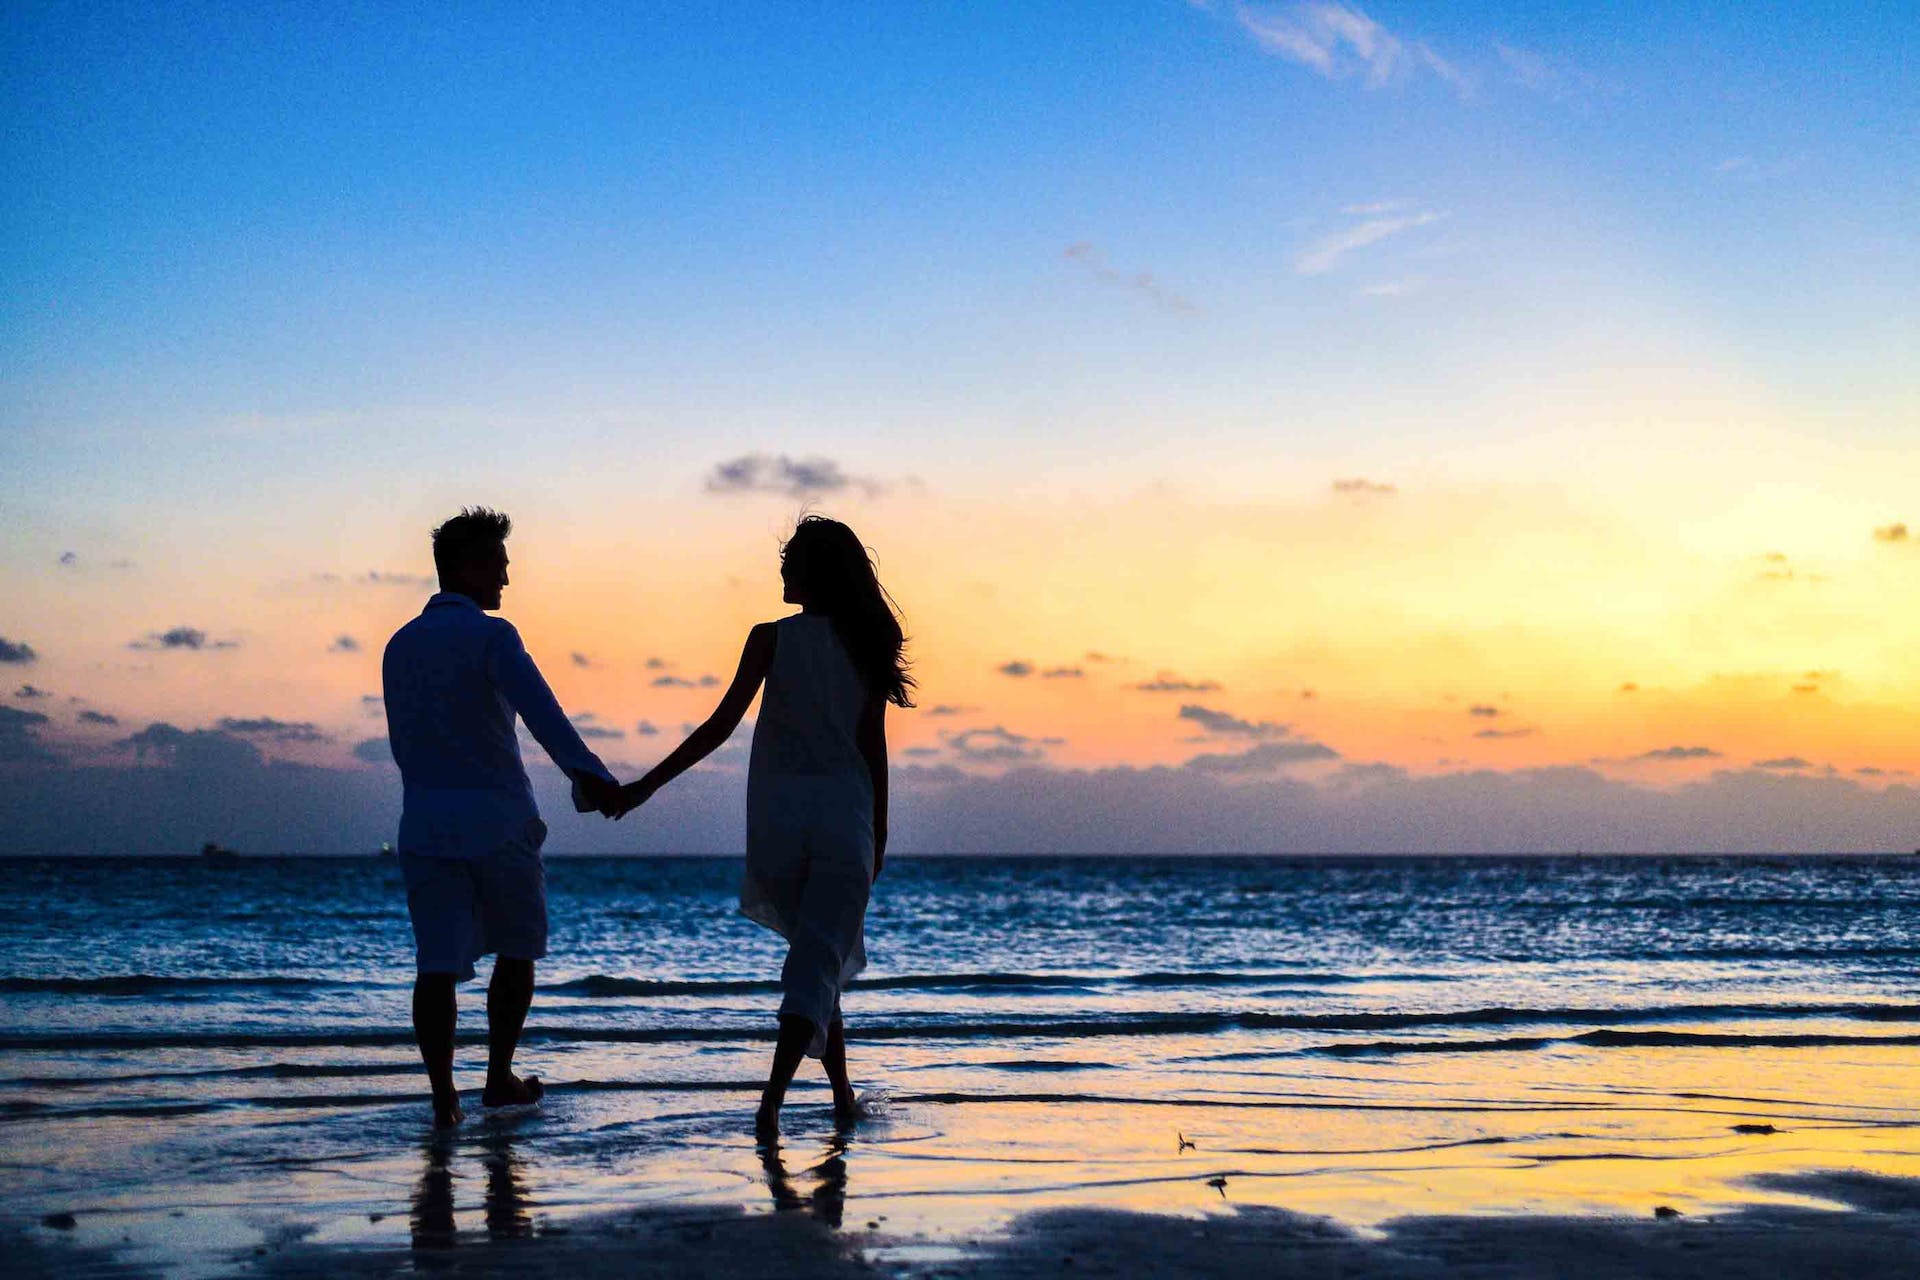 A couple walking on the beach | Source: Pexels